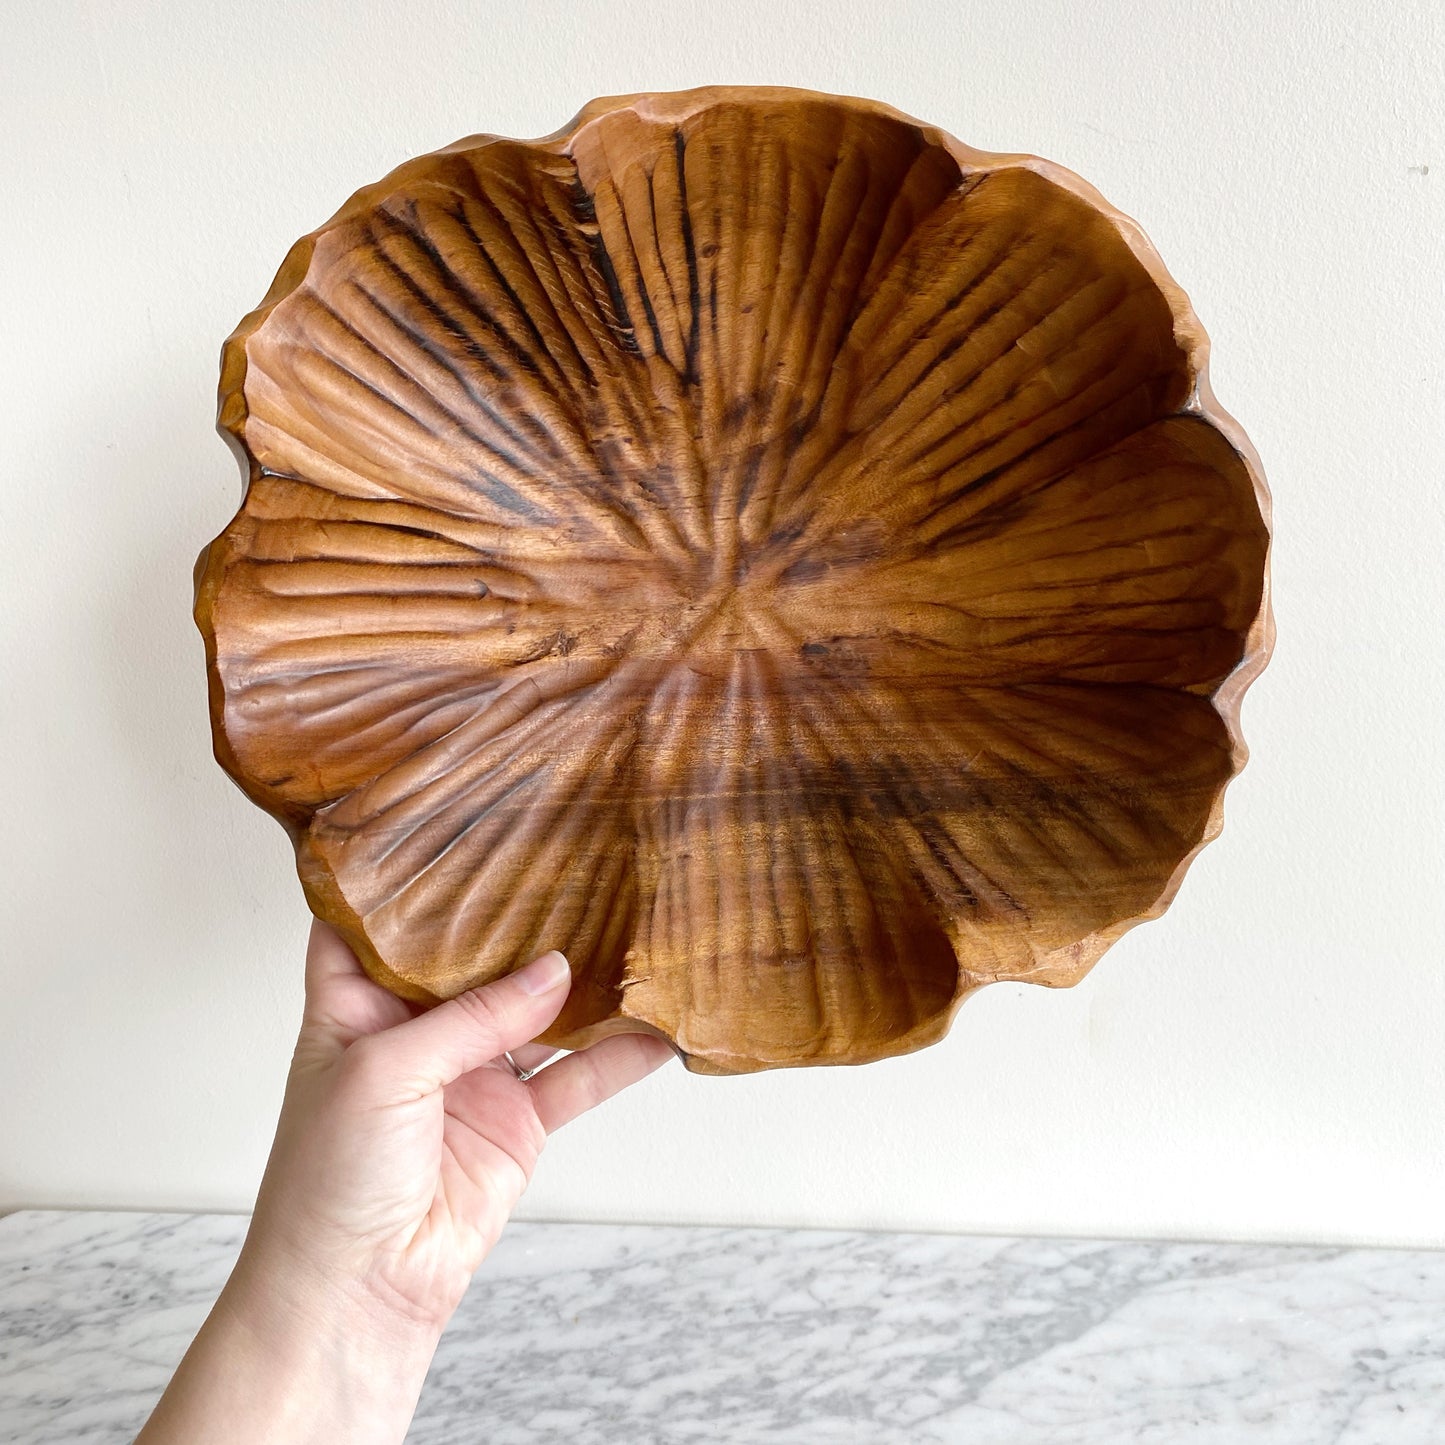 Found Carved Wooden Bowl